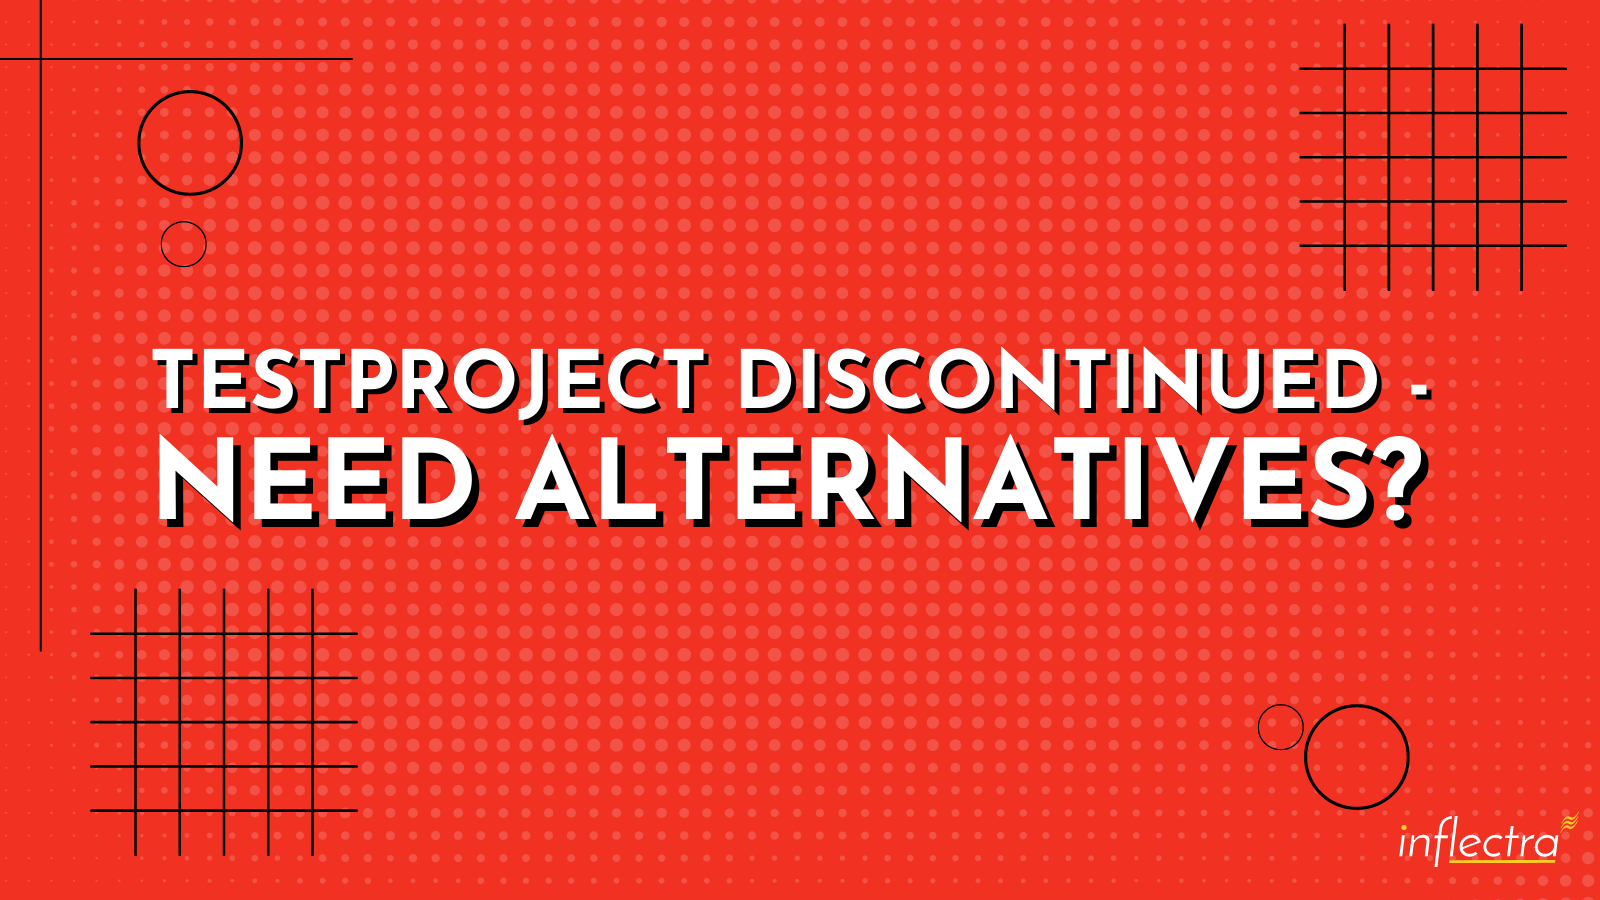 testproject-discontinued-need-alternatives-image